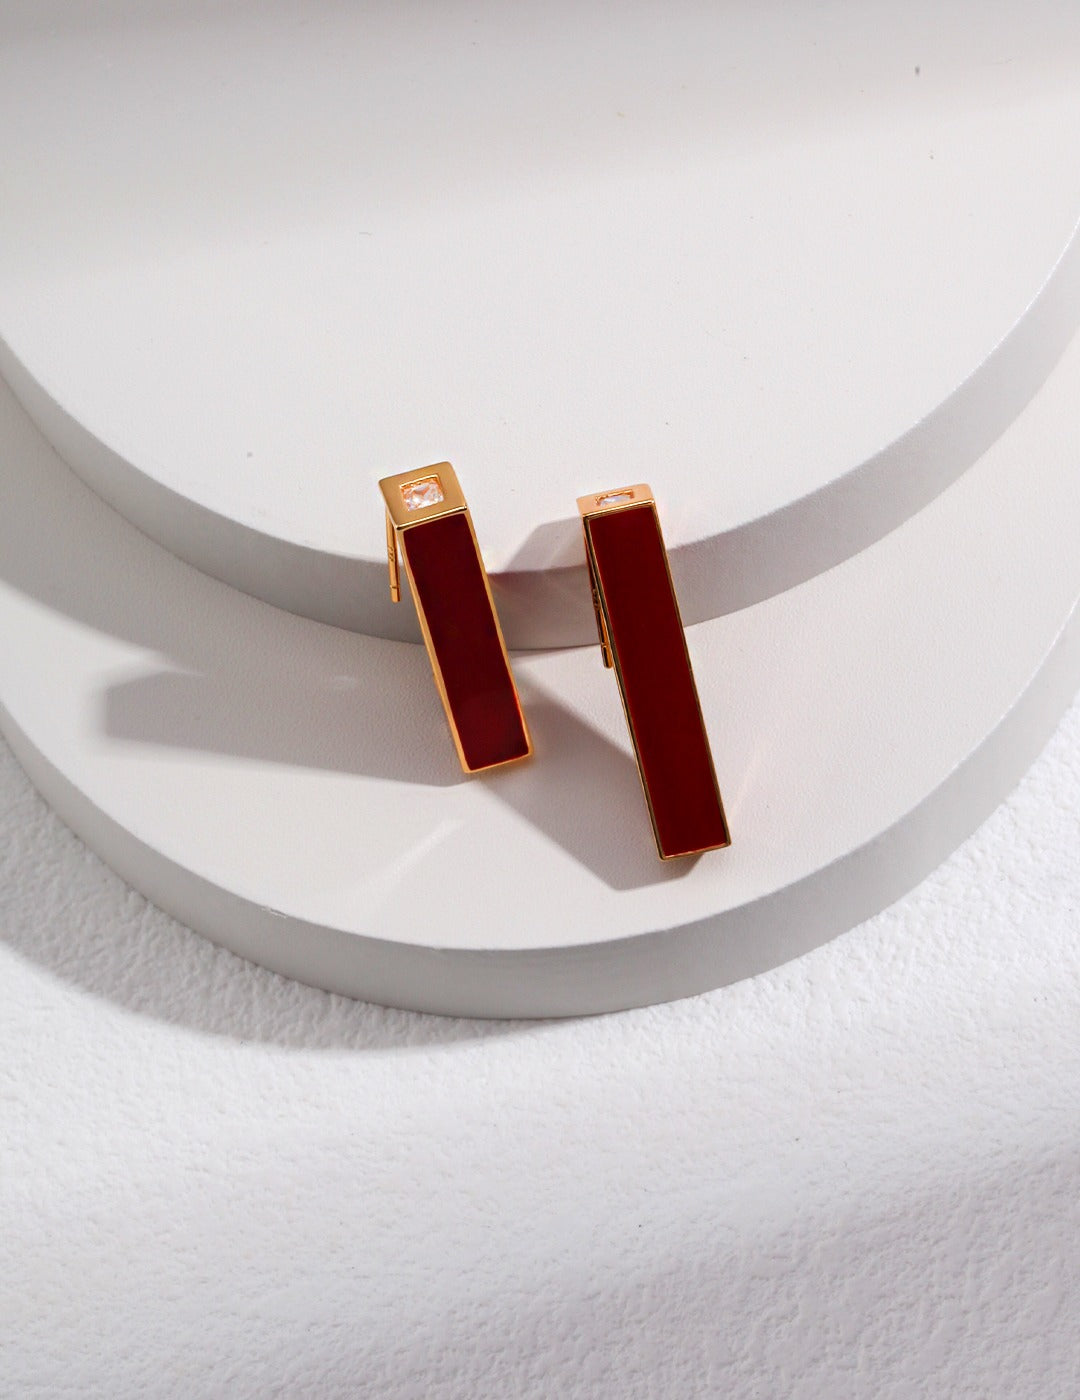 focus shot of an elegant 18k gold-plated stud earrings with red drip glaze